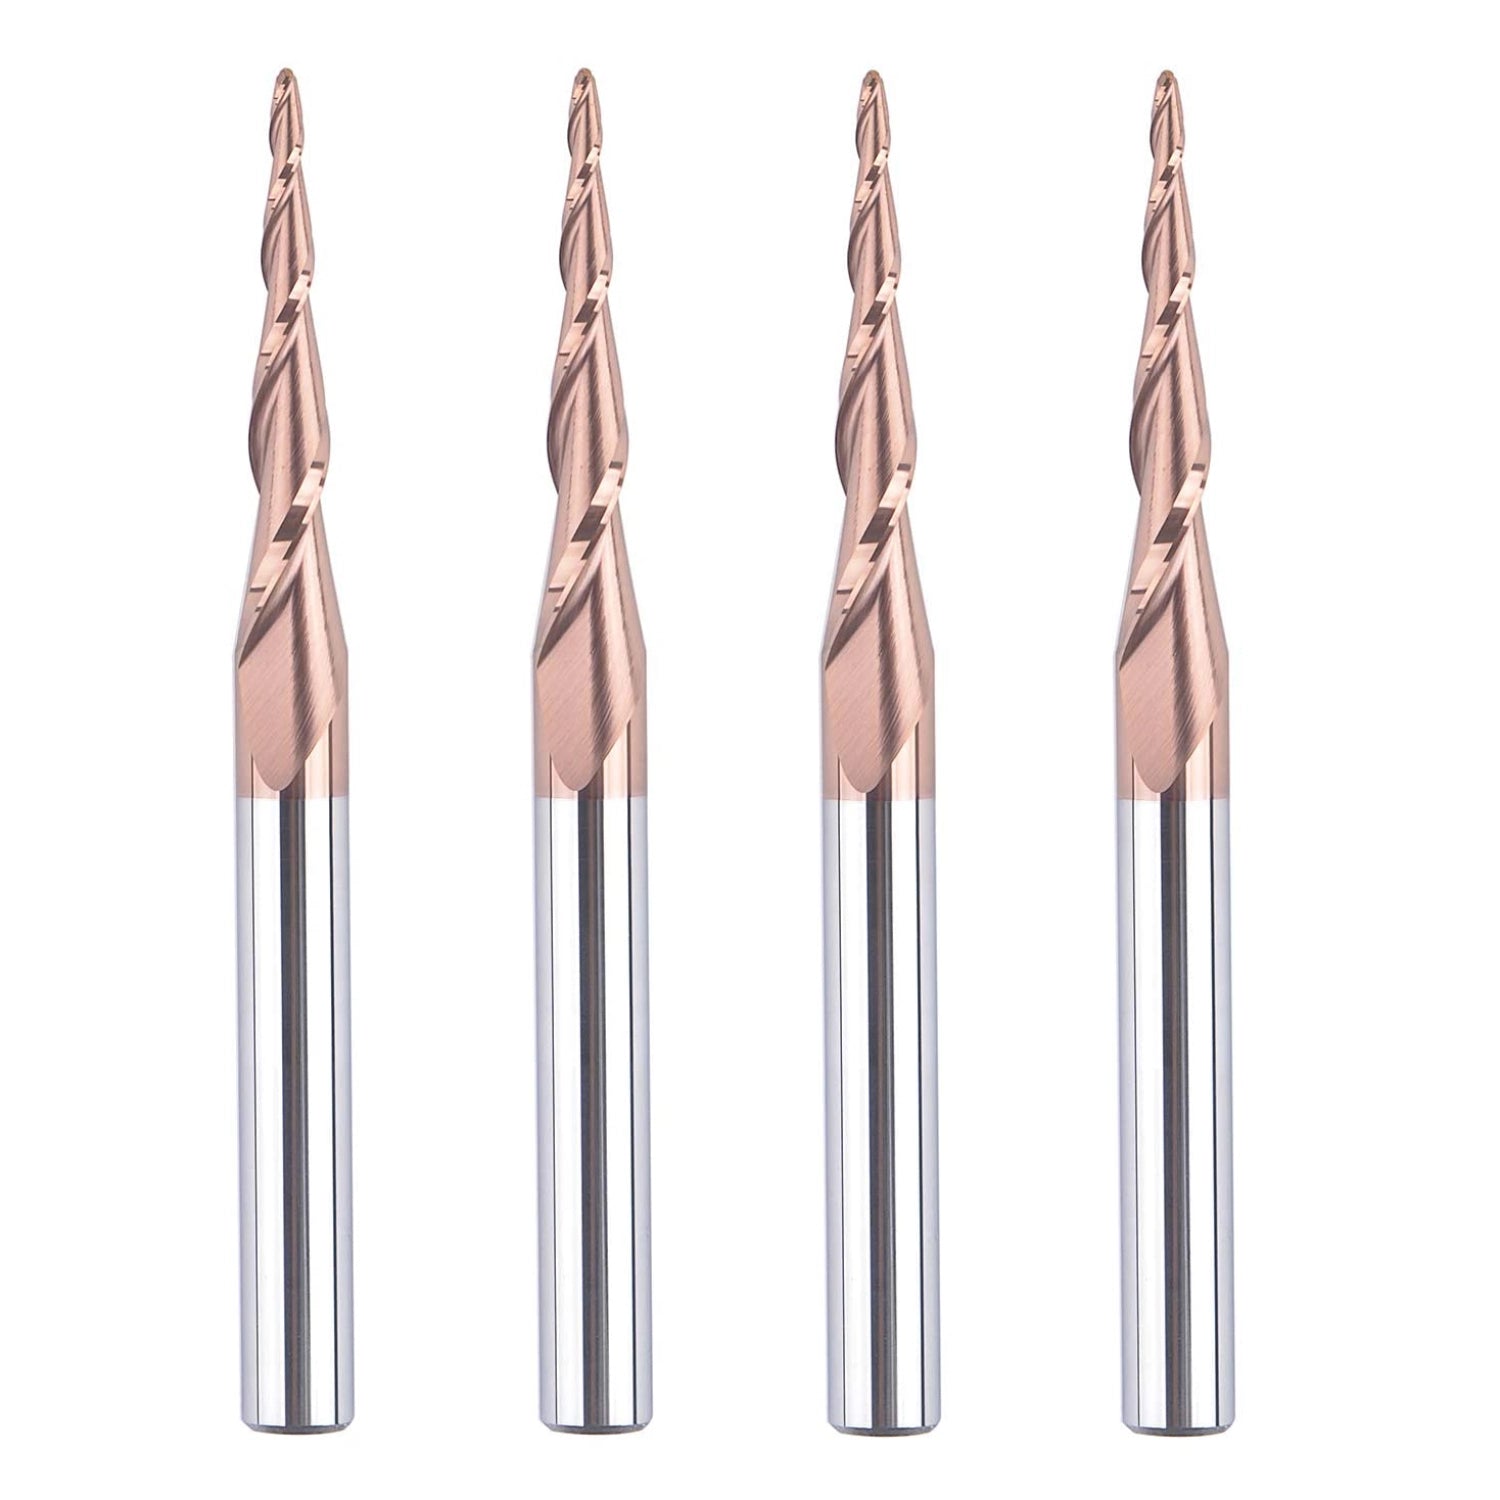 SpeTool W01009 CNC 2D and 3D Carving 4.36 Deg Tapered Angle Ball Nose 0.75mm Radius x 1/4" Shank x 1-1/4" Cutting Length x 3" Long 2 Flute SC H-Si Coated Upcut Router Bit-10